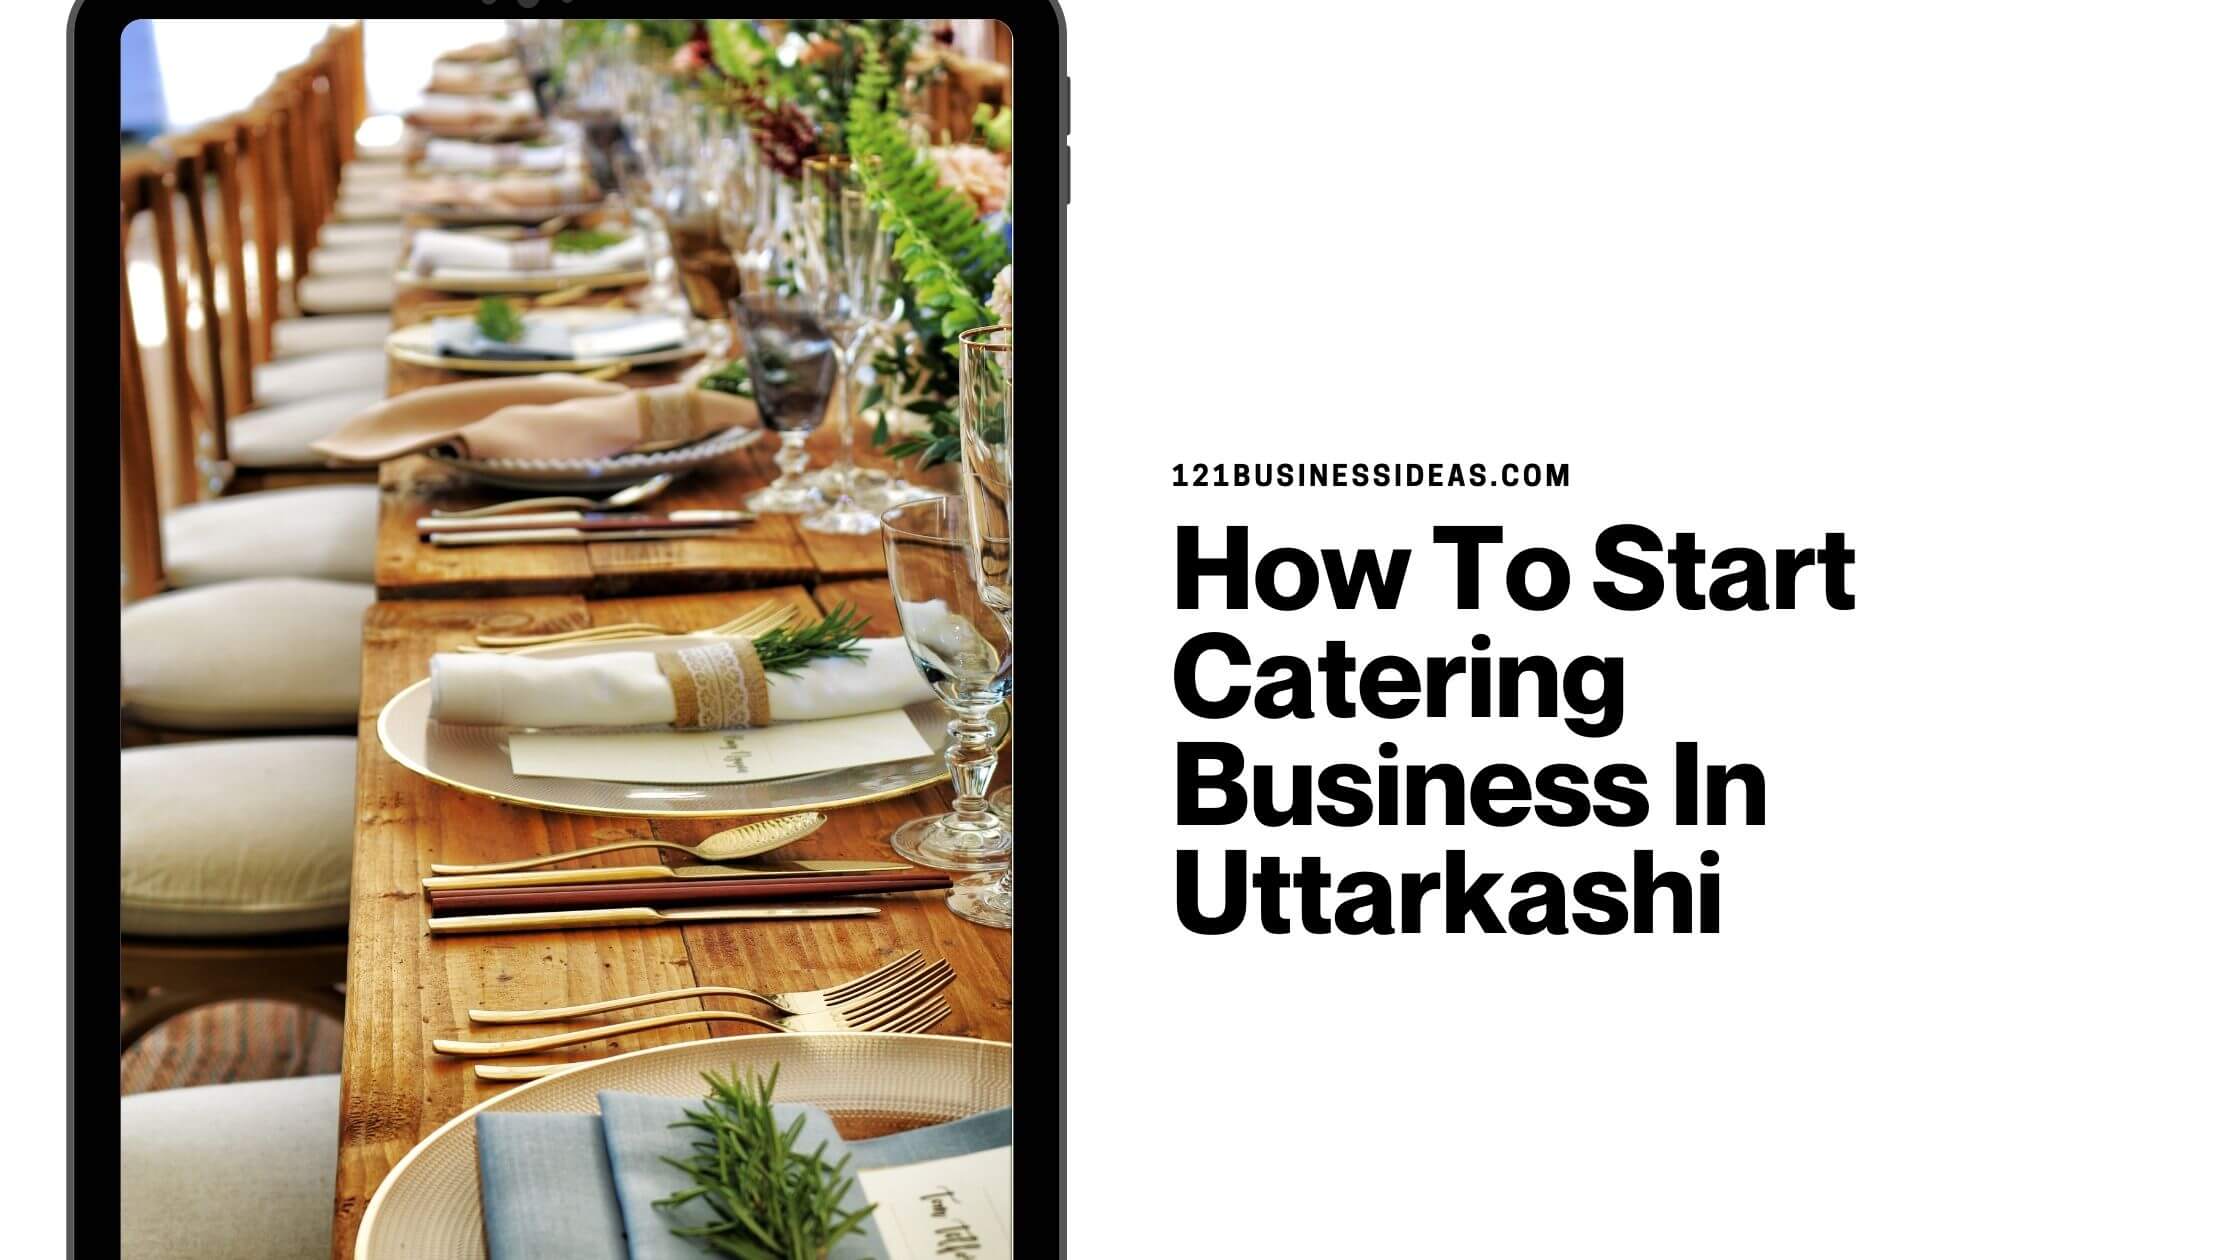 How To Start Catering Business In Uttarkashi (1)